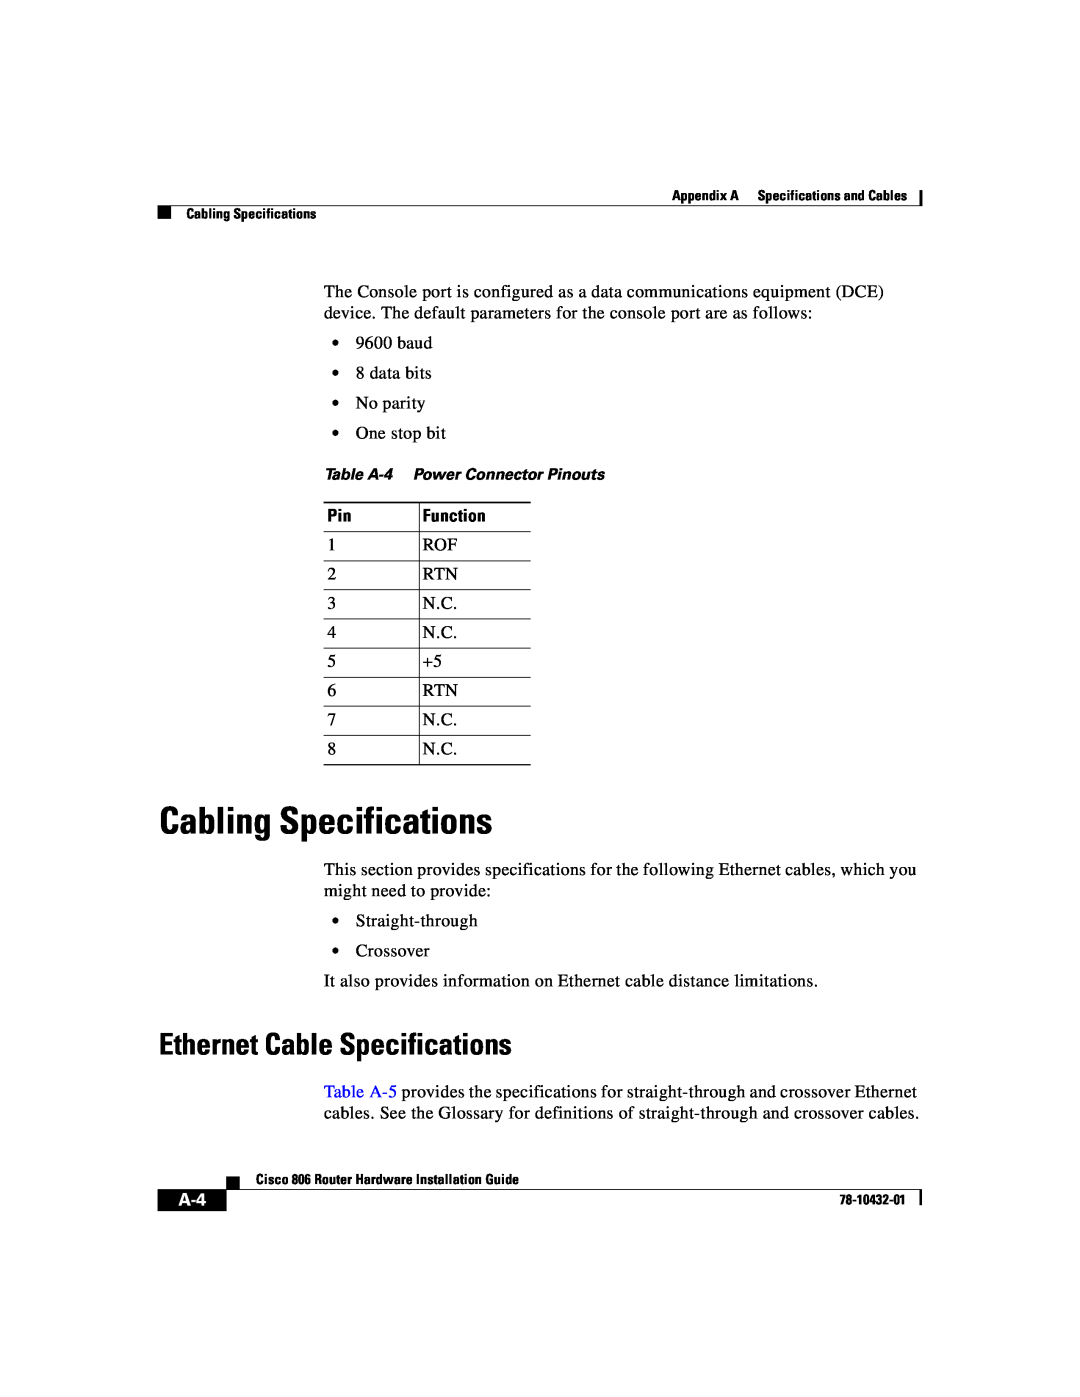 Cisco Systems 806 manual Cabling Specifications, Ethernet Cable Specifications 